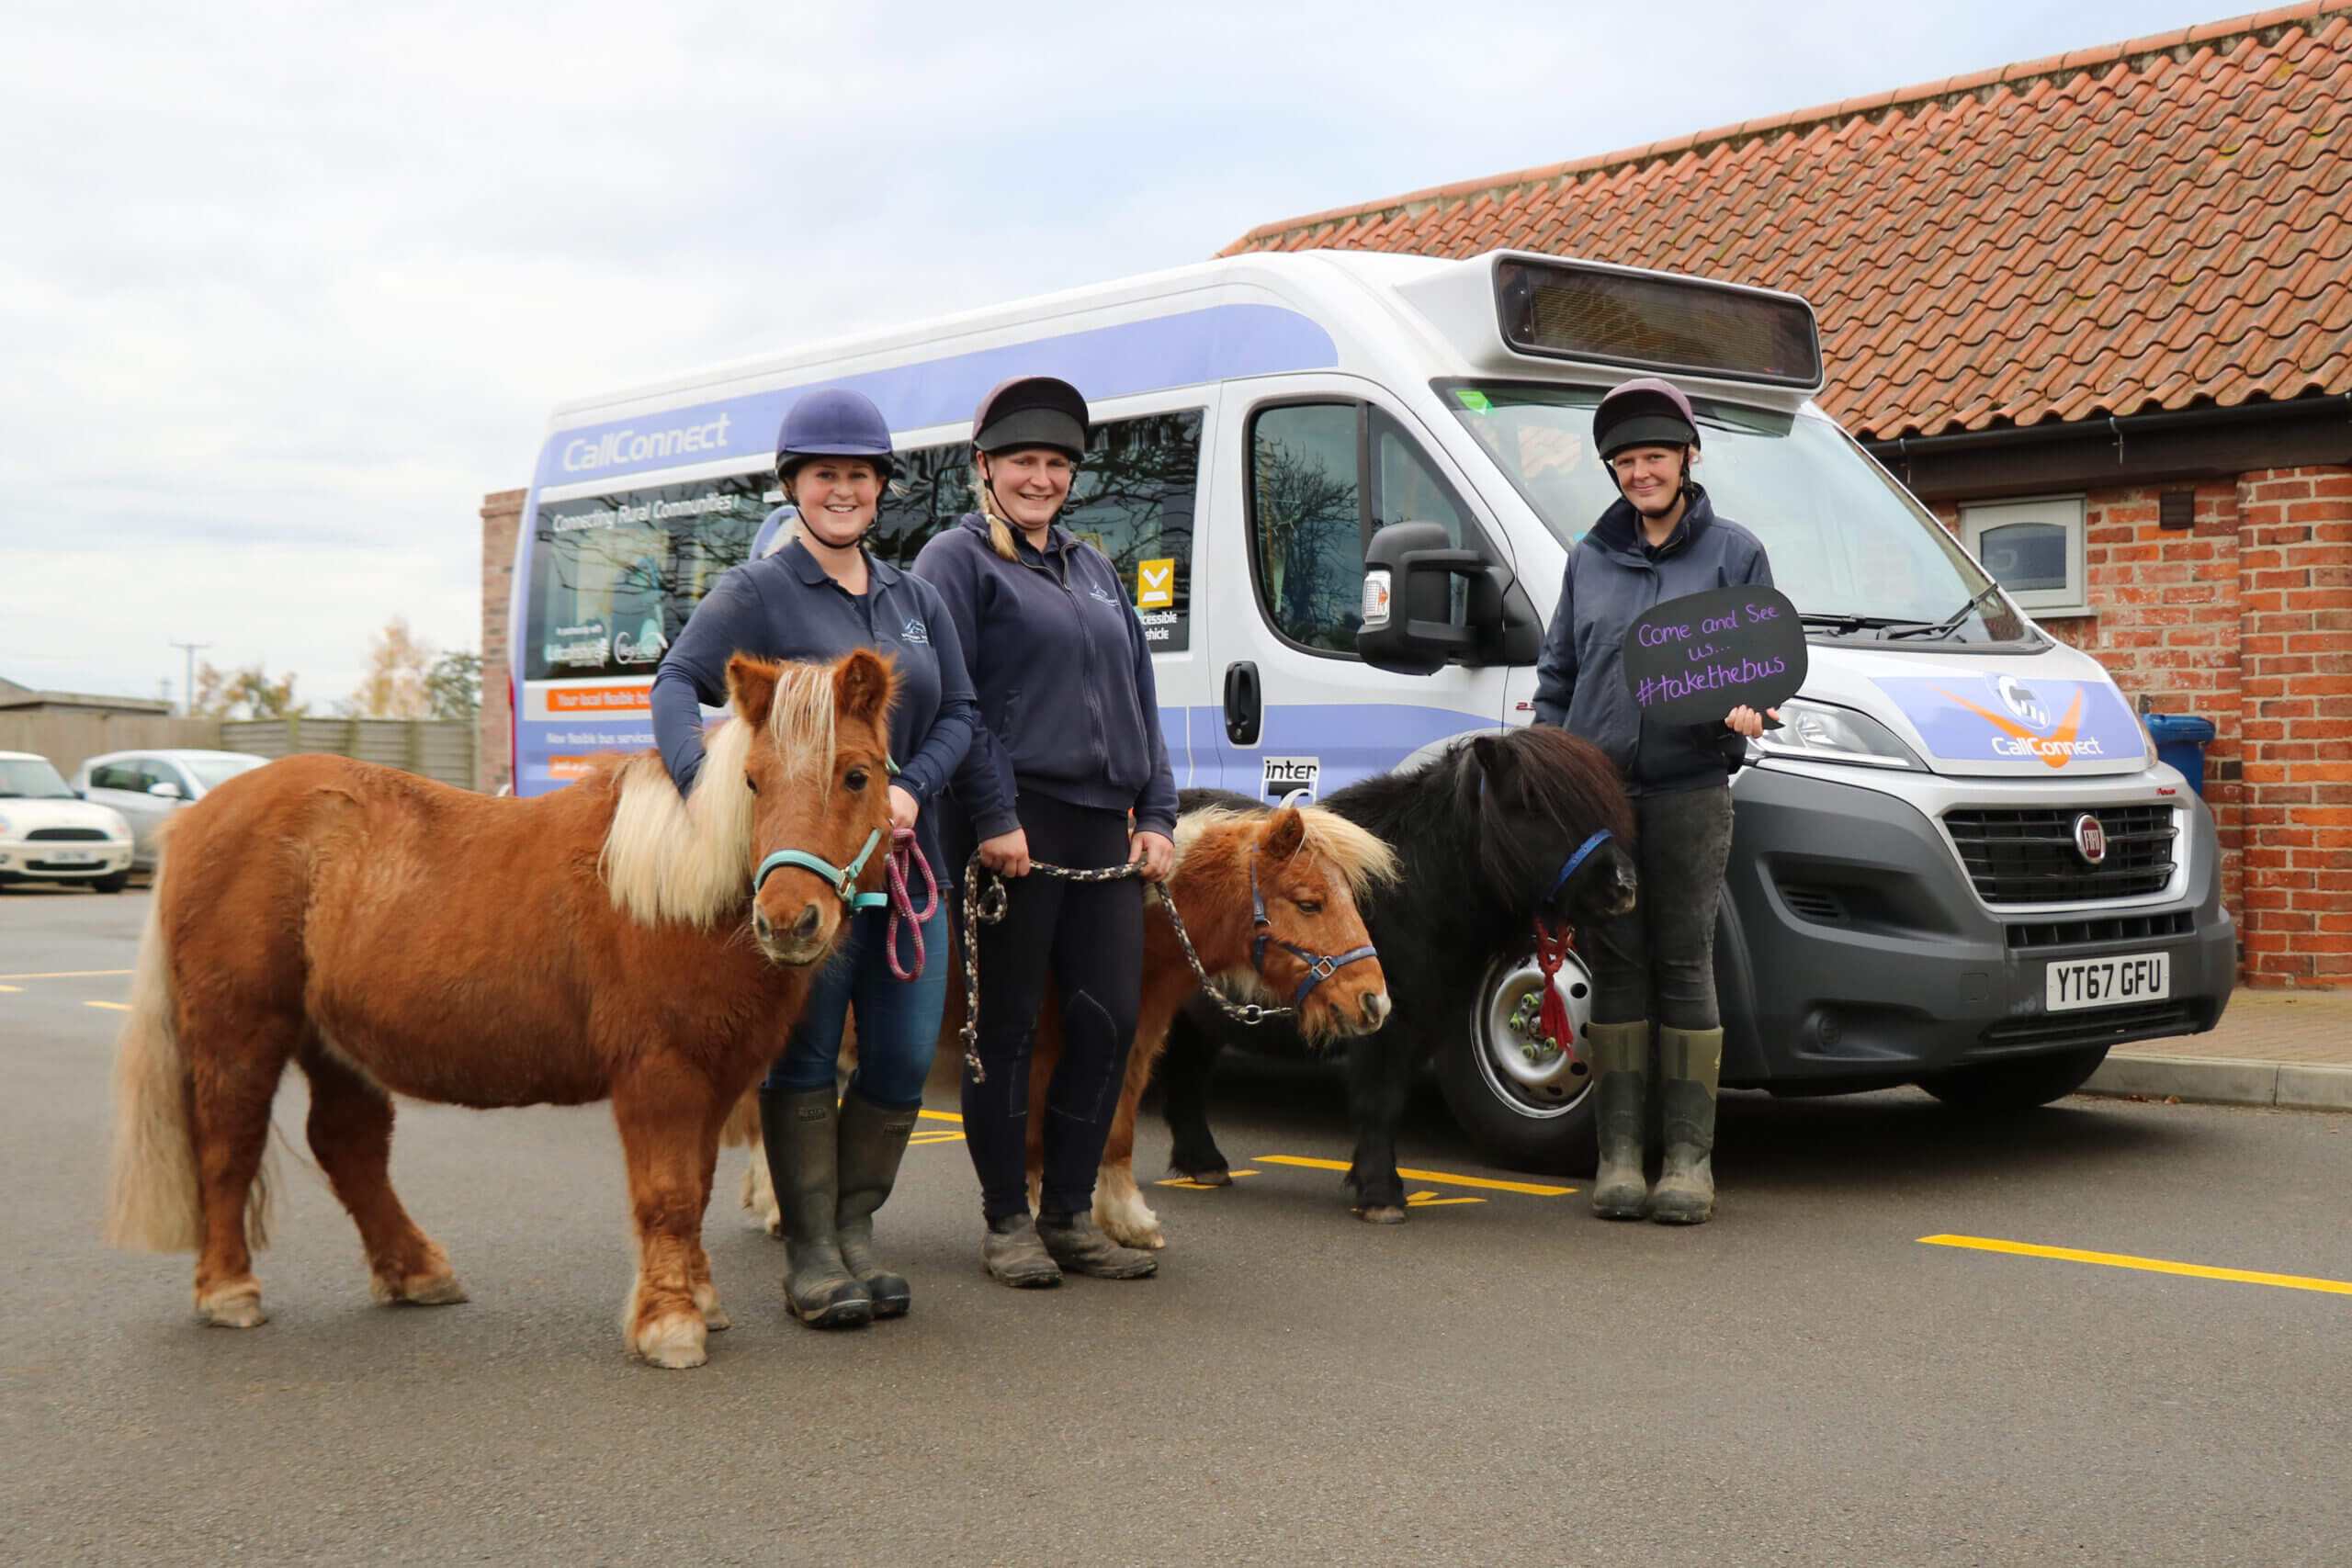 three shetland ponies with their handlers stood in front of a mini bus